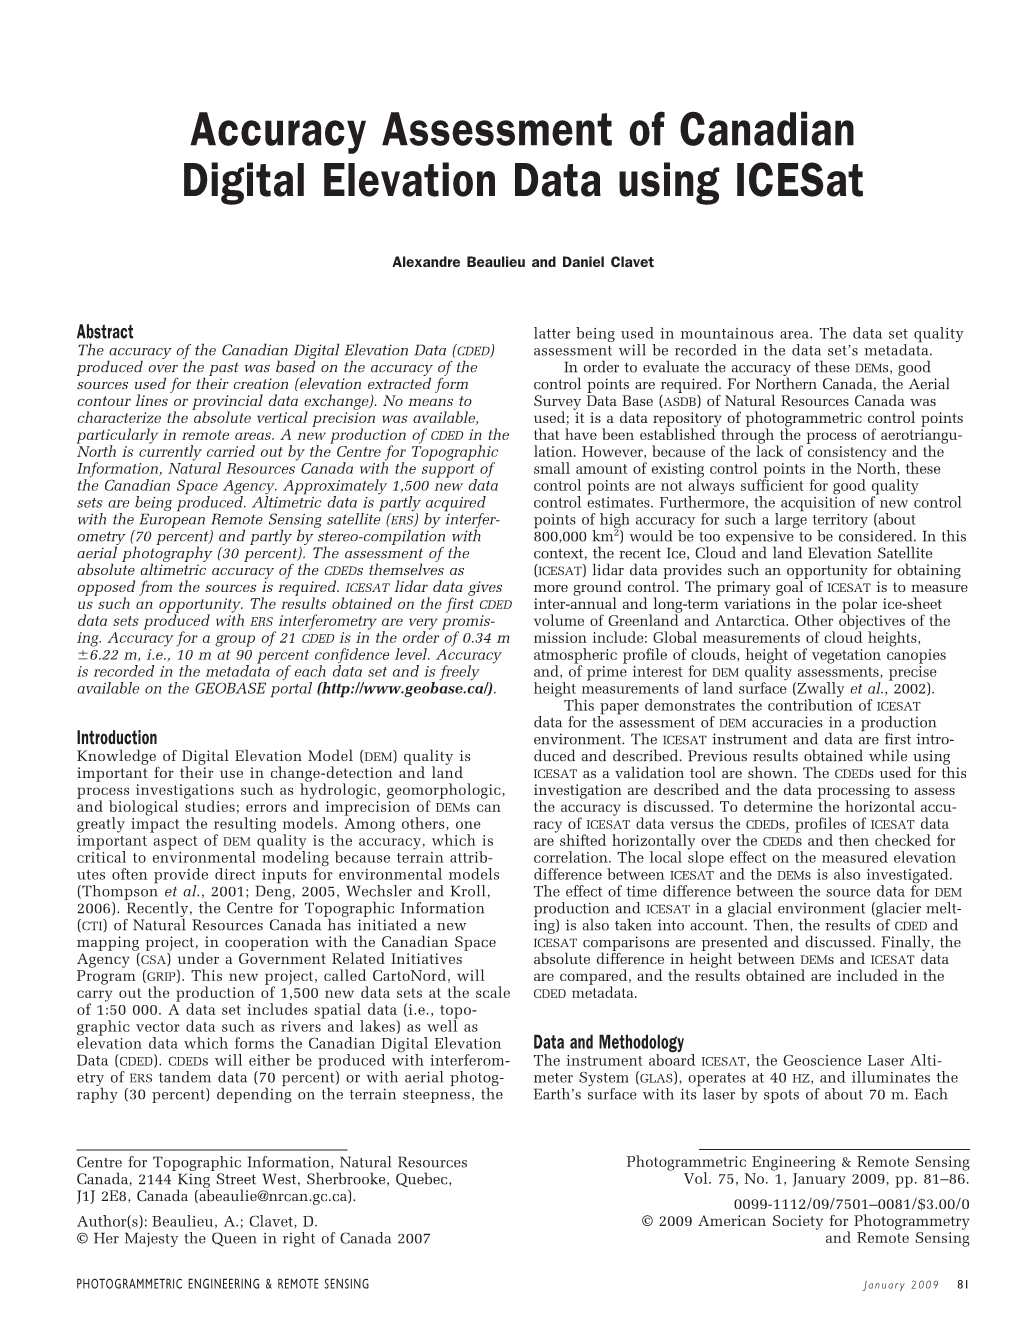 Accuracy Assessment of Canadian Digital Elevation Data Using Icesat